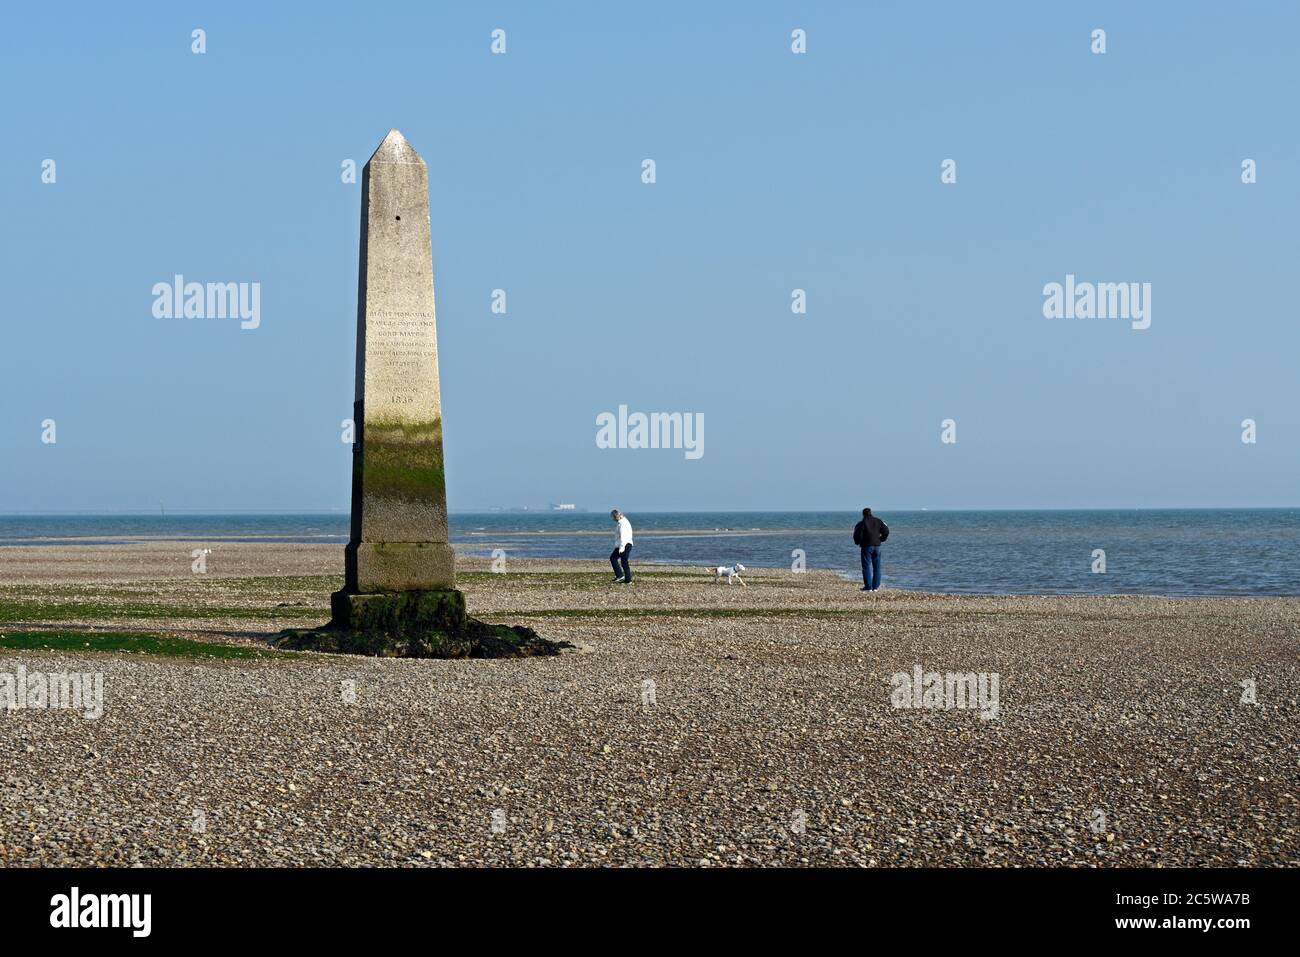 The Crowstone at Chalkwell in the Borough of Southend was erected to mark the eastern end of the City of London's jurisdiction over the River Thames. Stock Photo